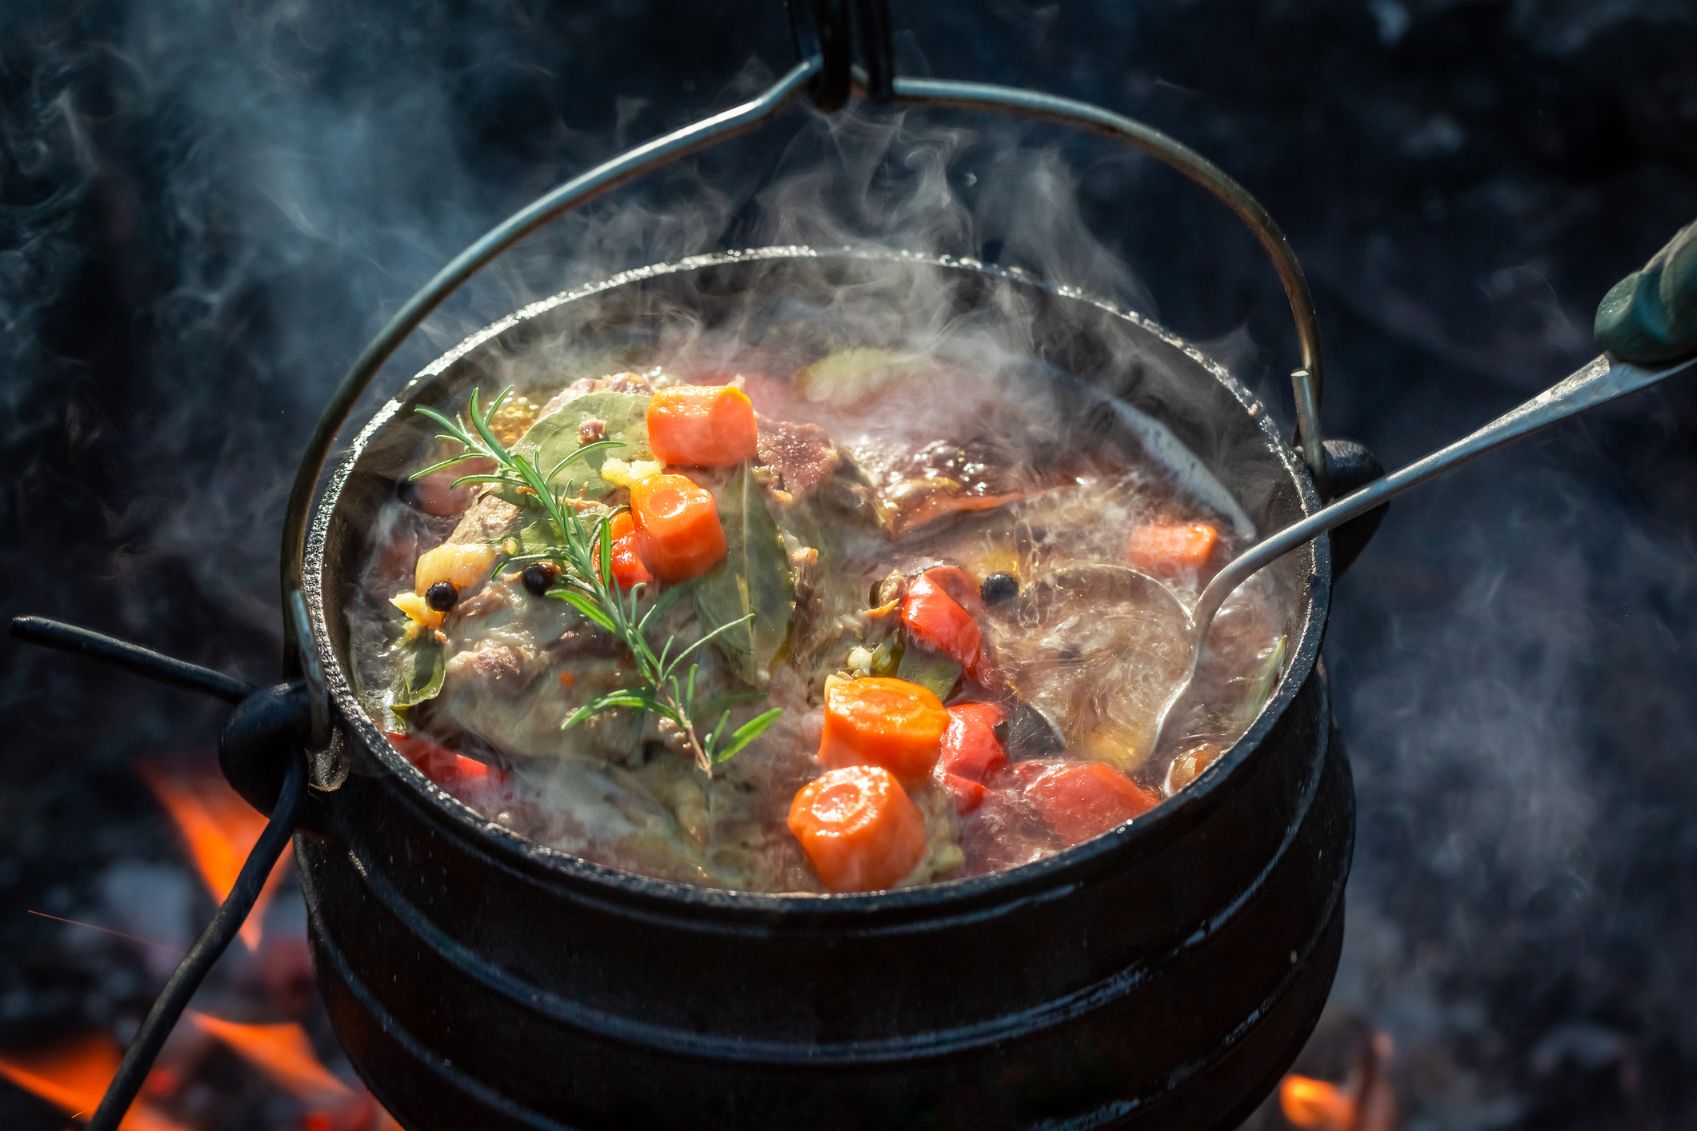  A steaming pot of campfire stew on campfire